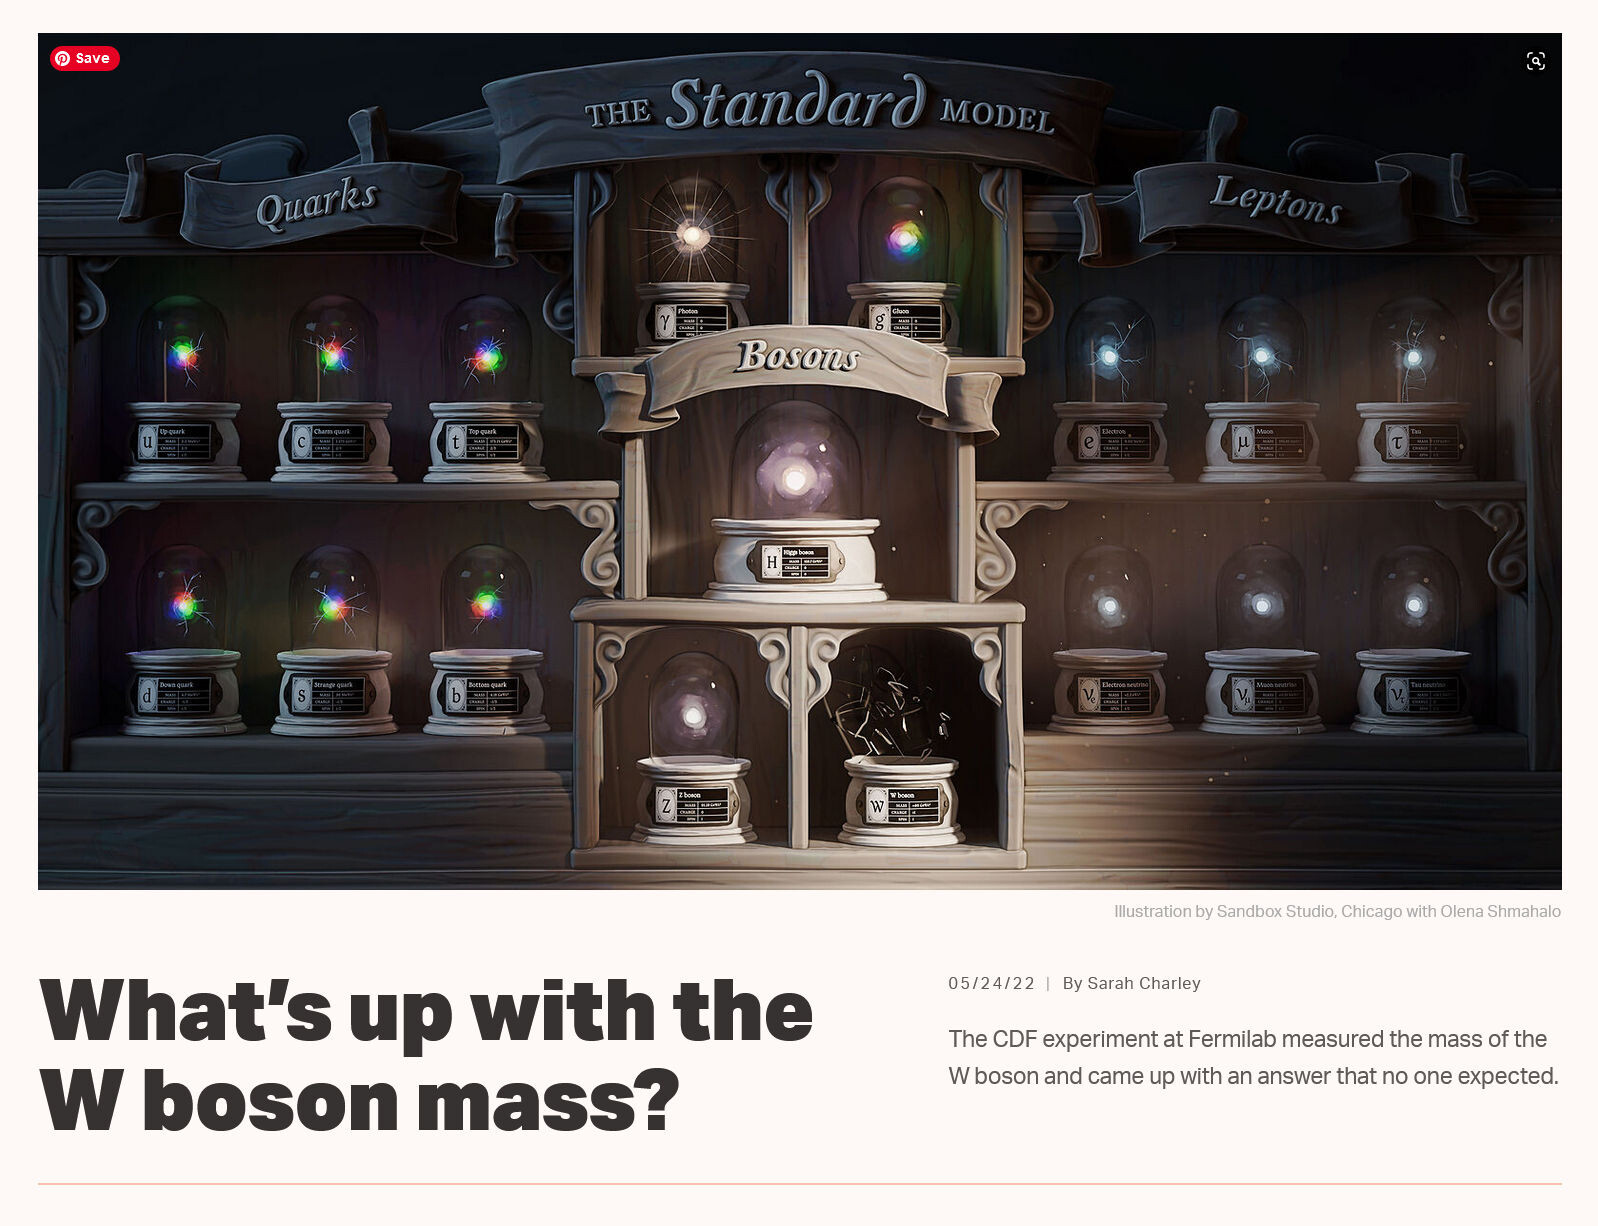 https://www.symmetrymagazine.org/article/whats-up-with-the-w-boson-mass

—
